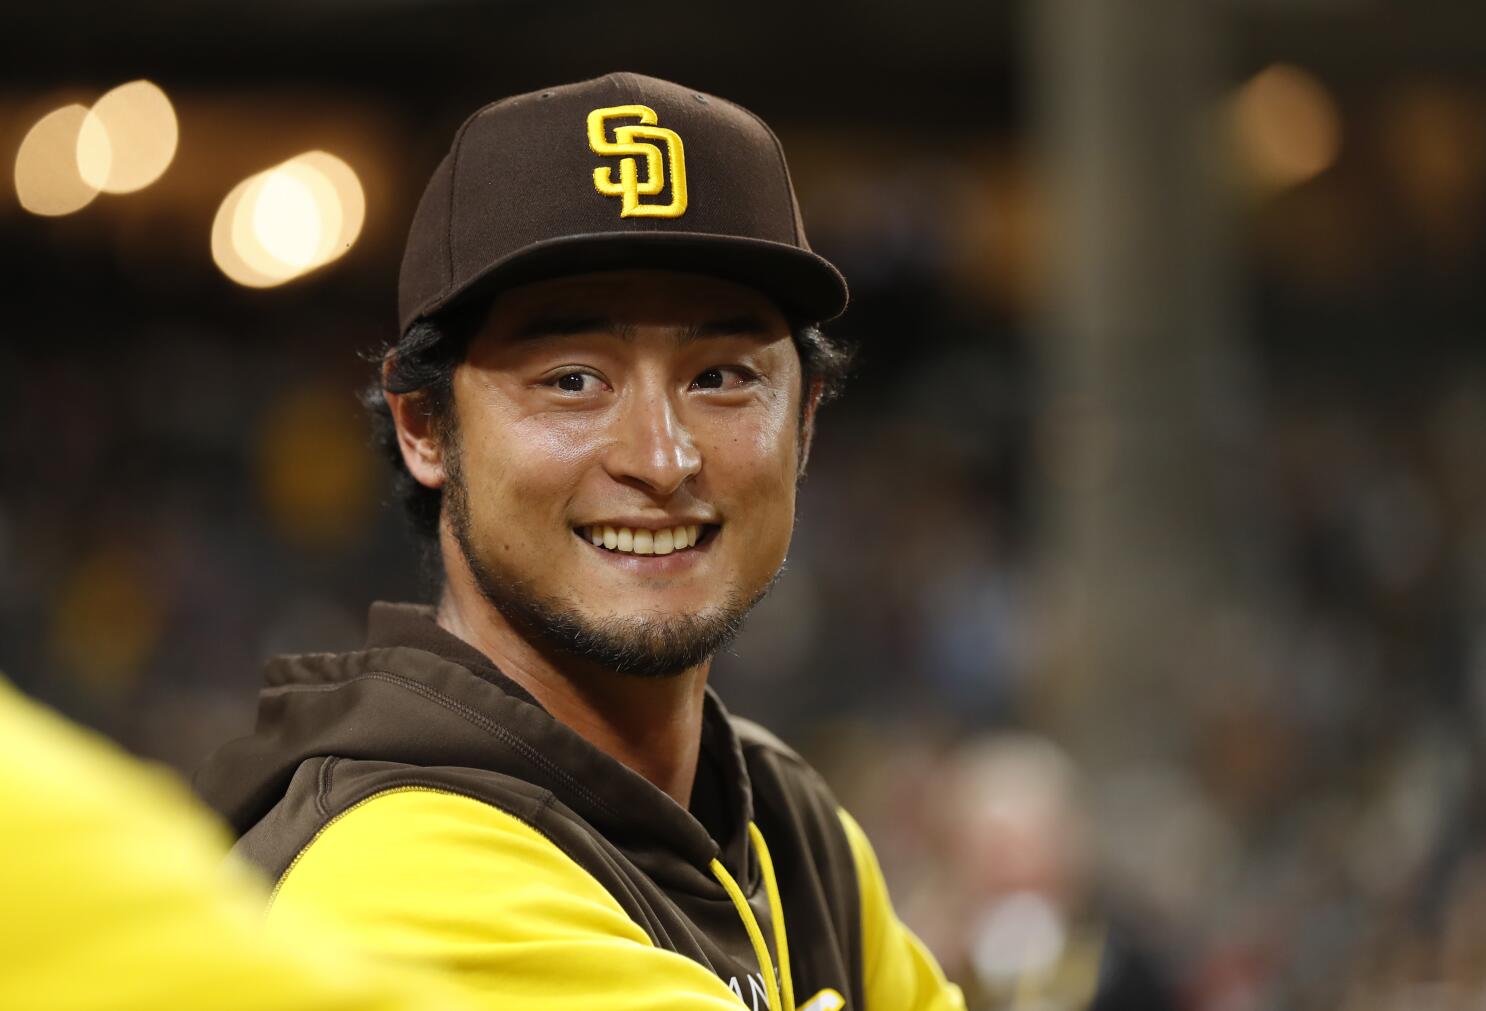 BREAKING NEWS: PADRES SIGN YU DARVISH TO A HUGE 6 Yr 108M